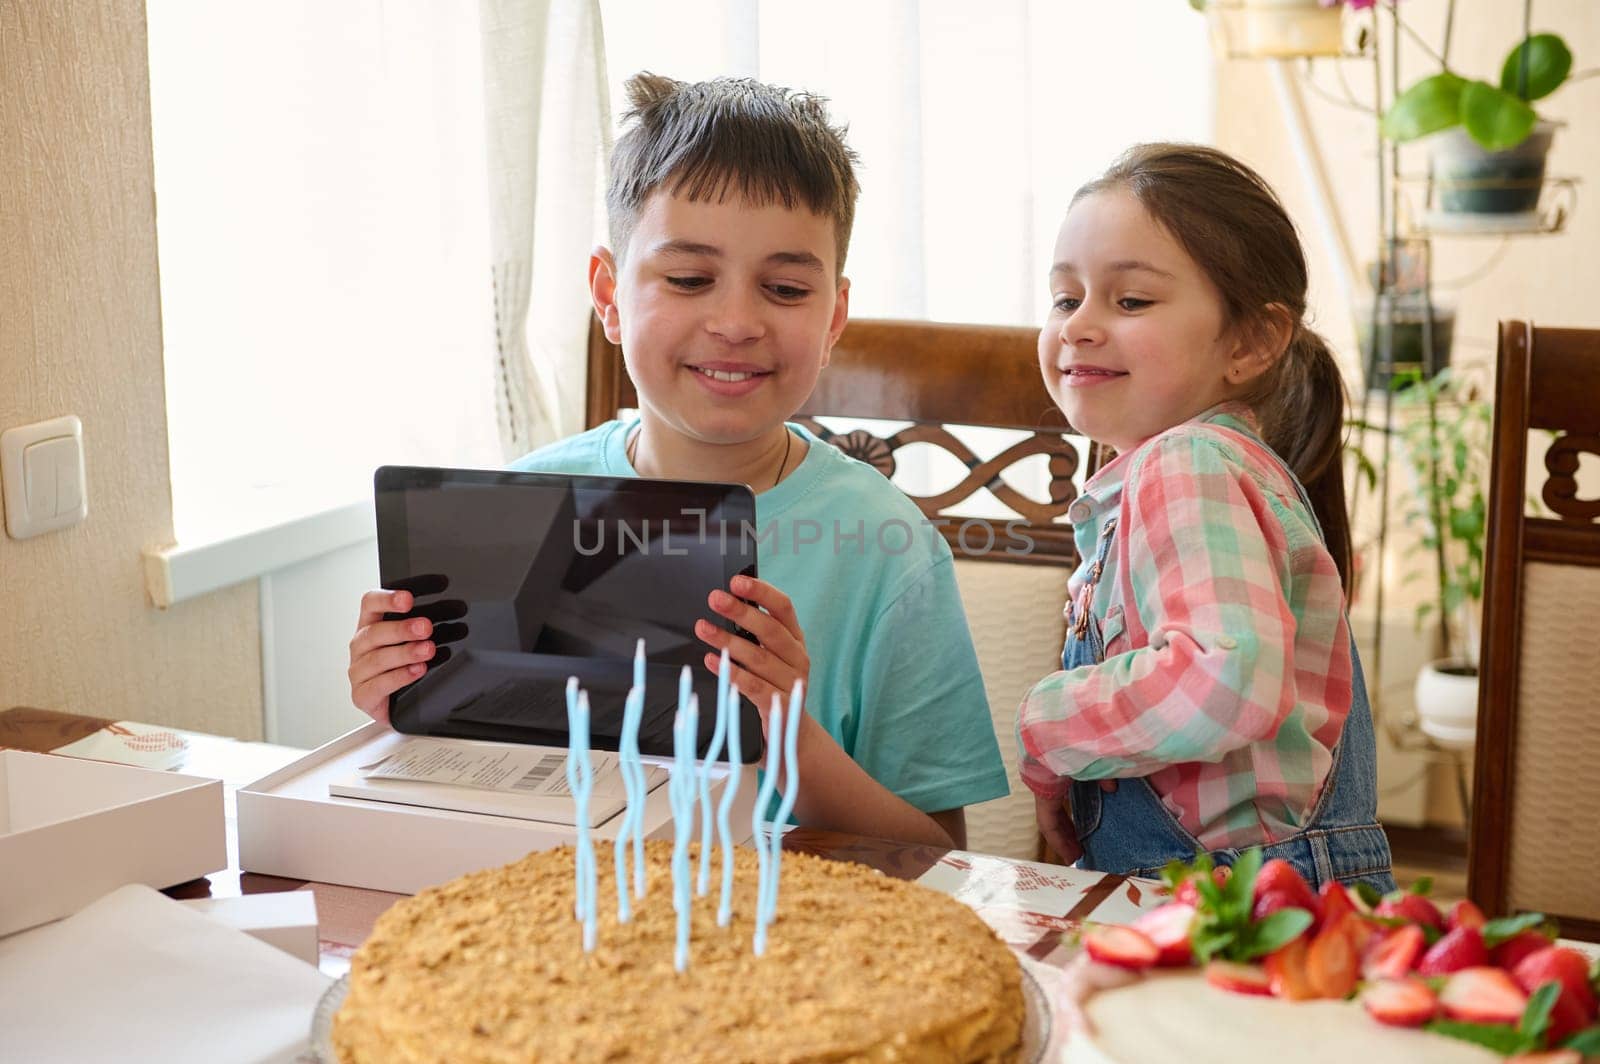 Cute teen boy smiles rejoices at digital tablet for his birthday. People. Lifestyle. Technology. Life events. Childhood by artgf